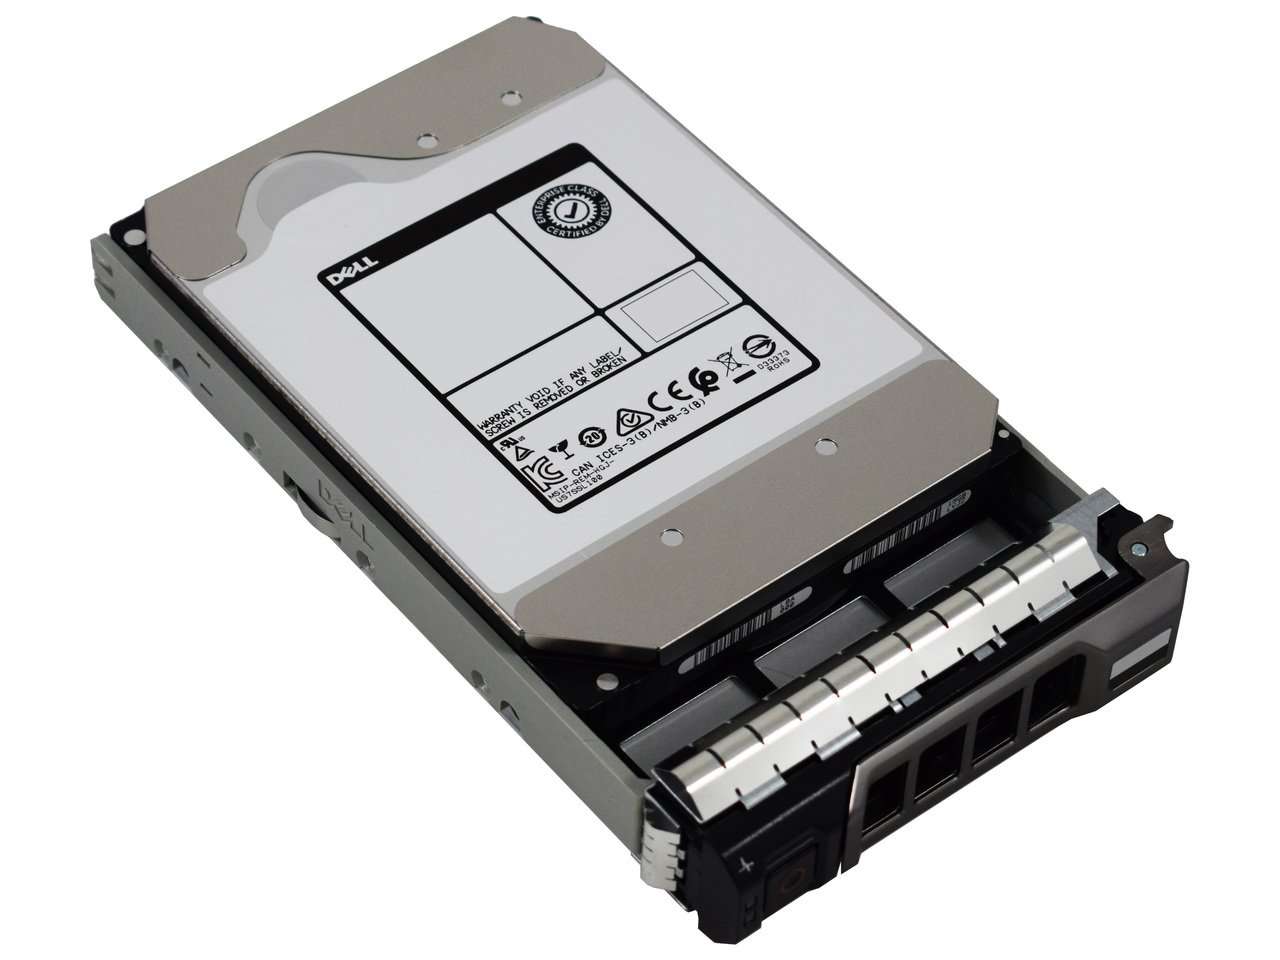 Dell G13 FV4DC 2TB 7.2K RPM SAS 6Gb/s 512n 128MB 3.5" NearLine Manufacturer Recertified HDD